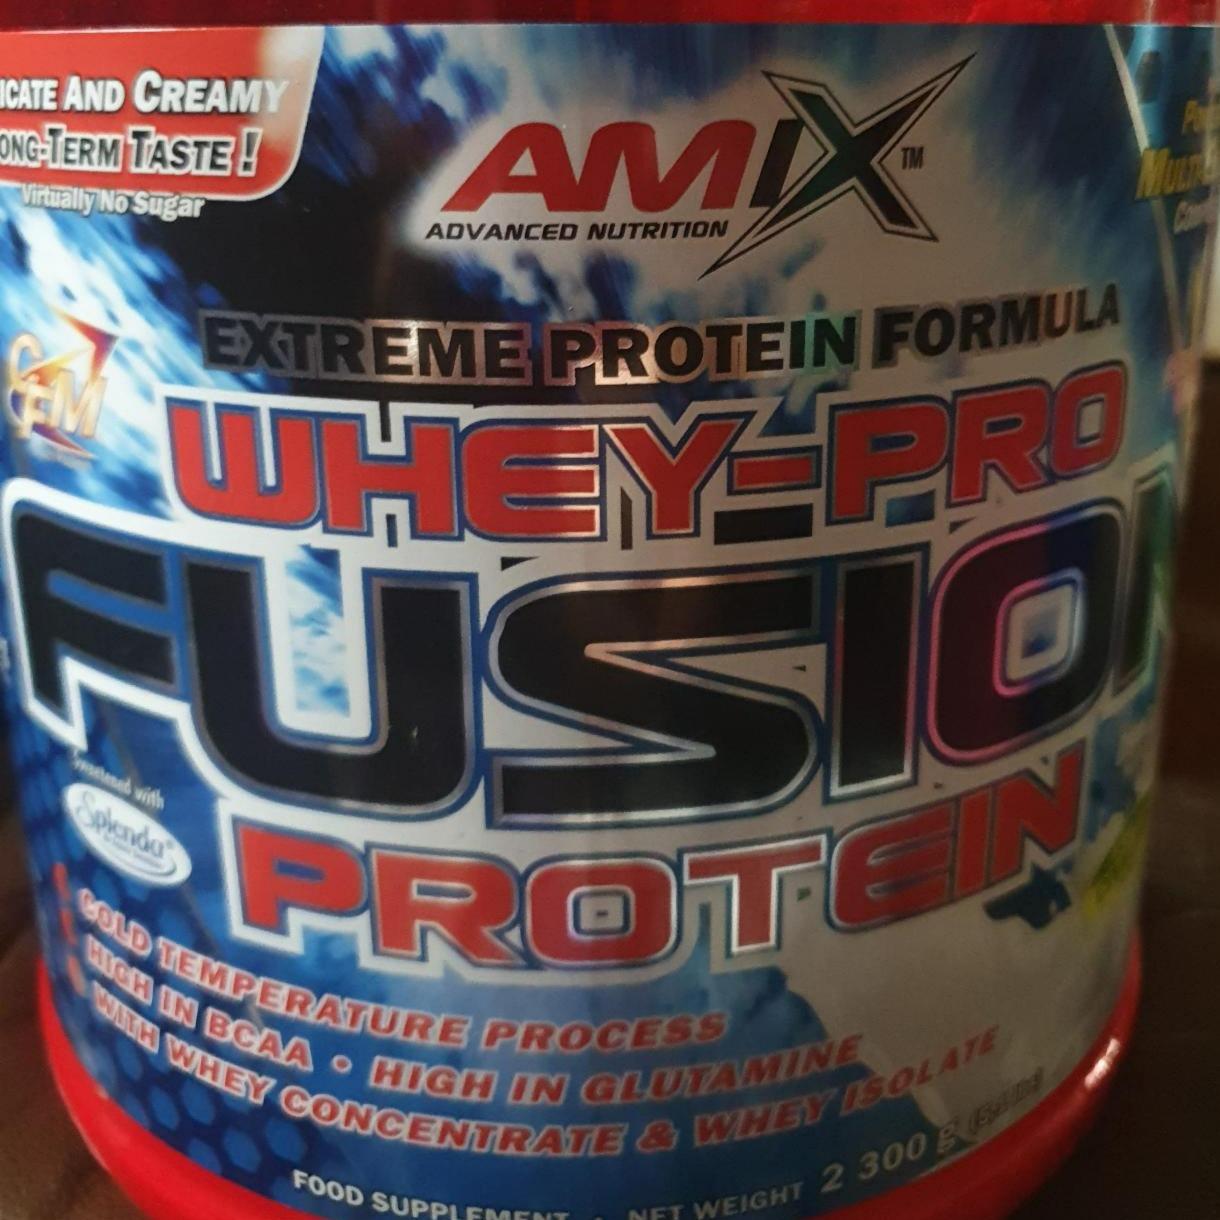 Fotografie - Extreme protein formula Whey-Pro Fusion Protein Chocolate and Creamy Amix Nutrition